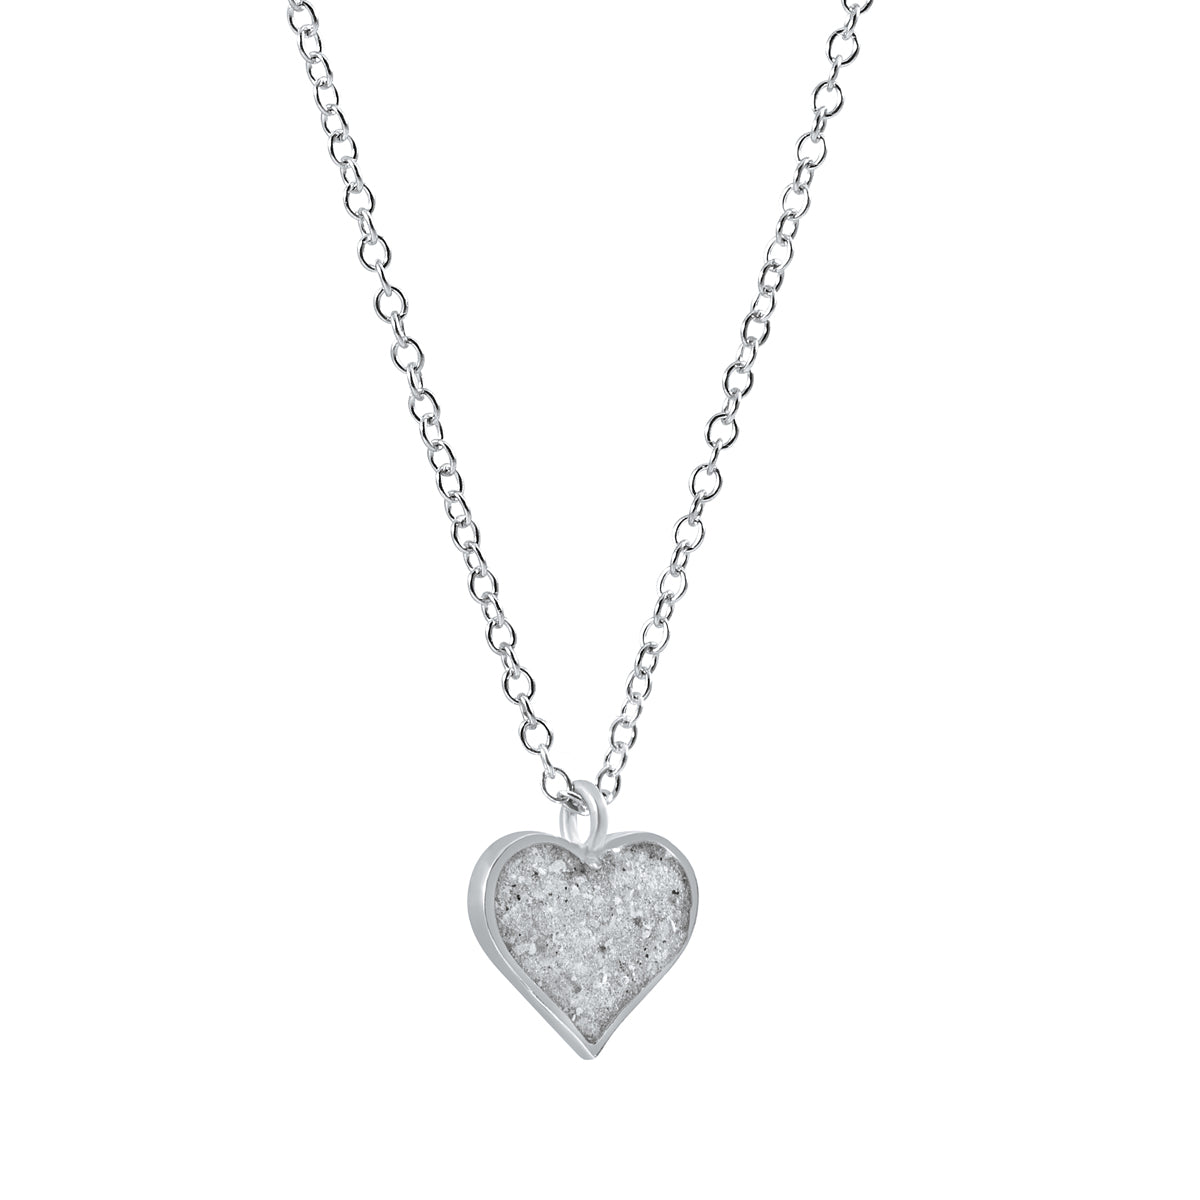 Dainty Heart Necklace - Silver